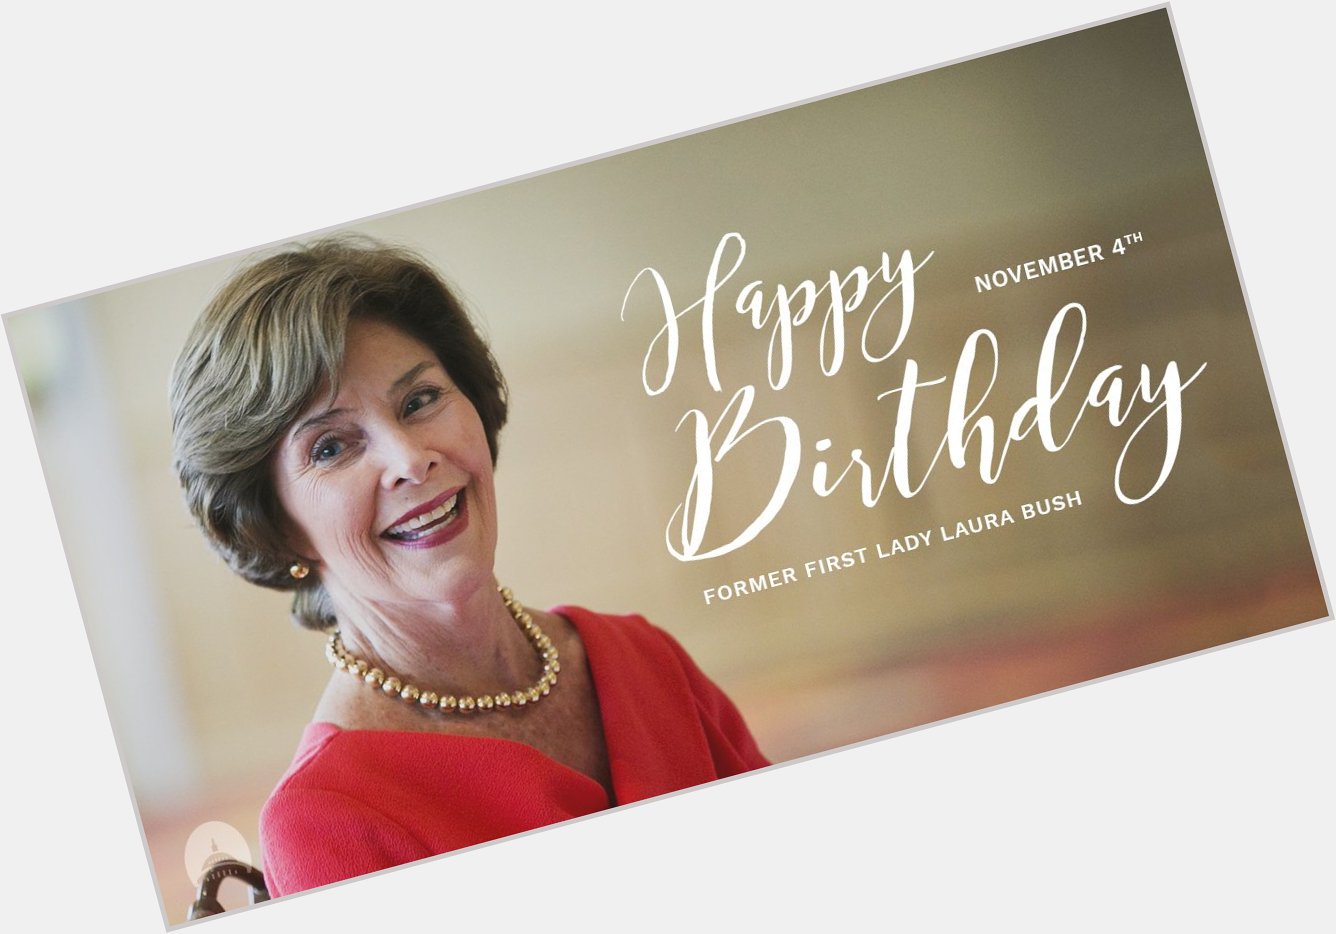 Wishing a very happy birthday to our former First Lady, Laura Bush! 